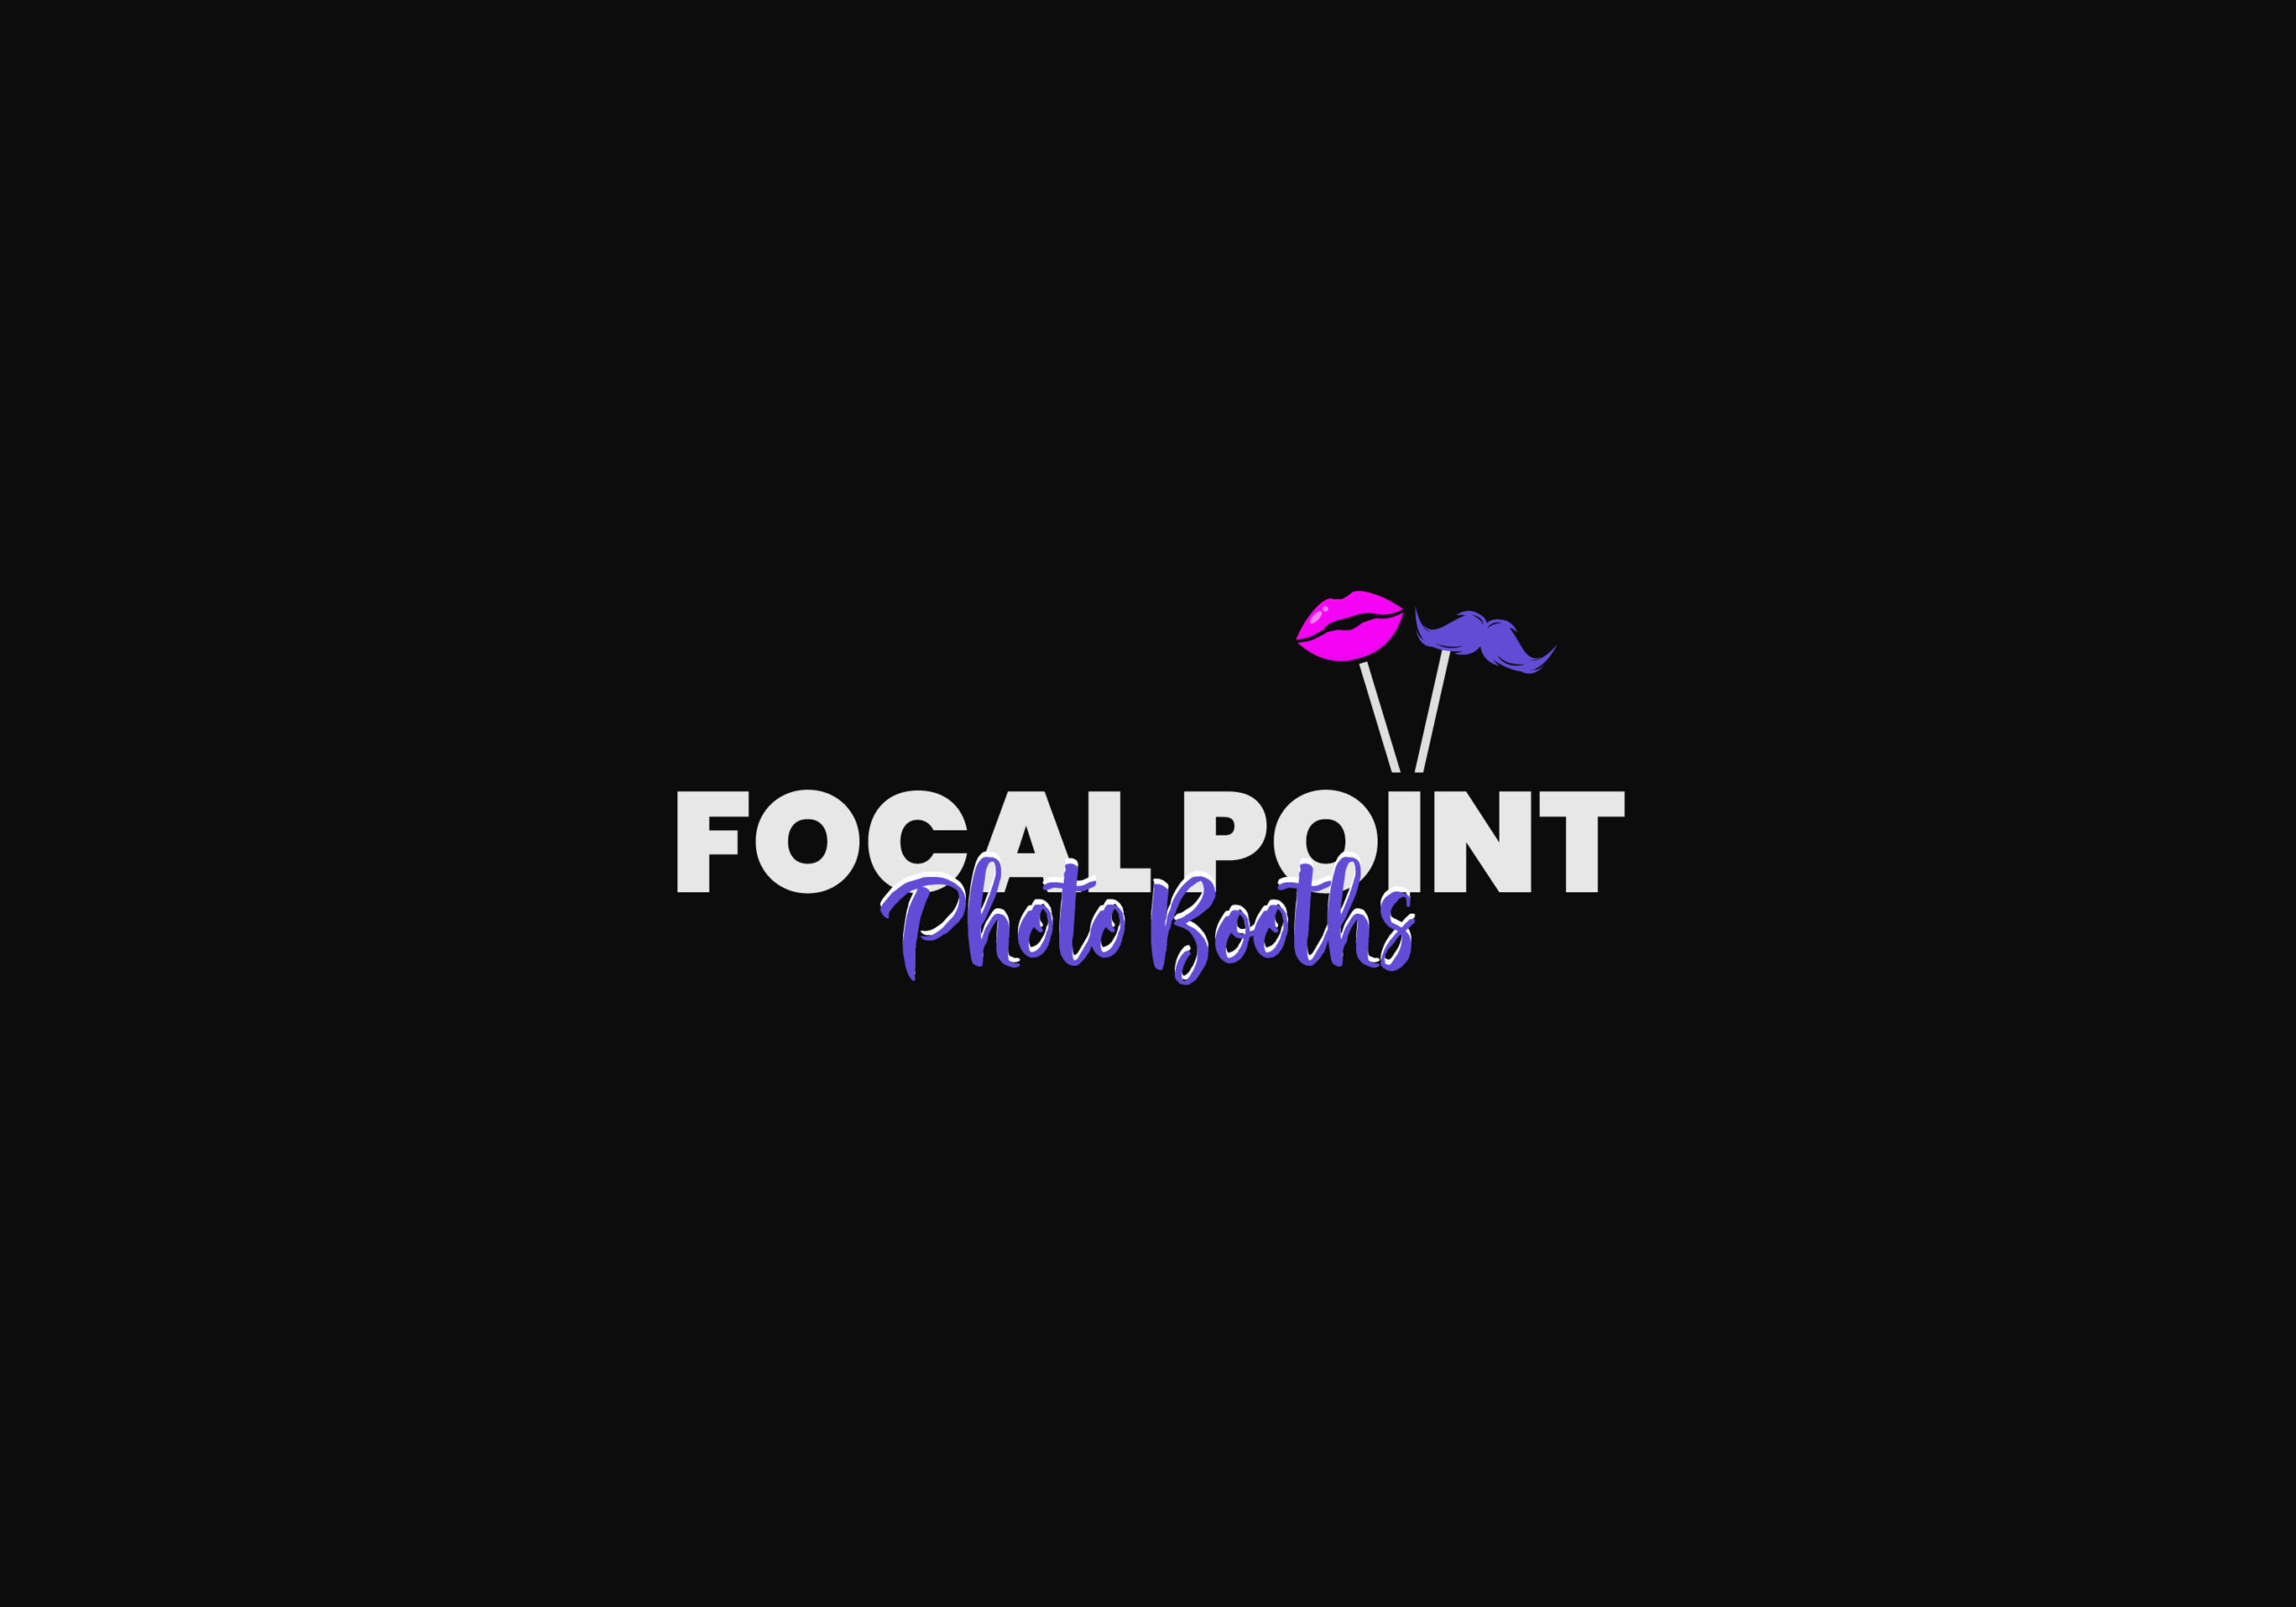 Focal Point Photo Booths